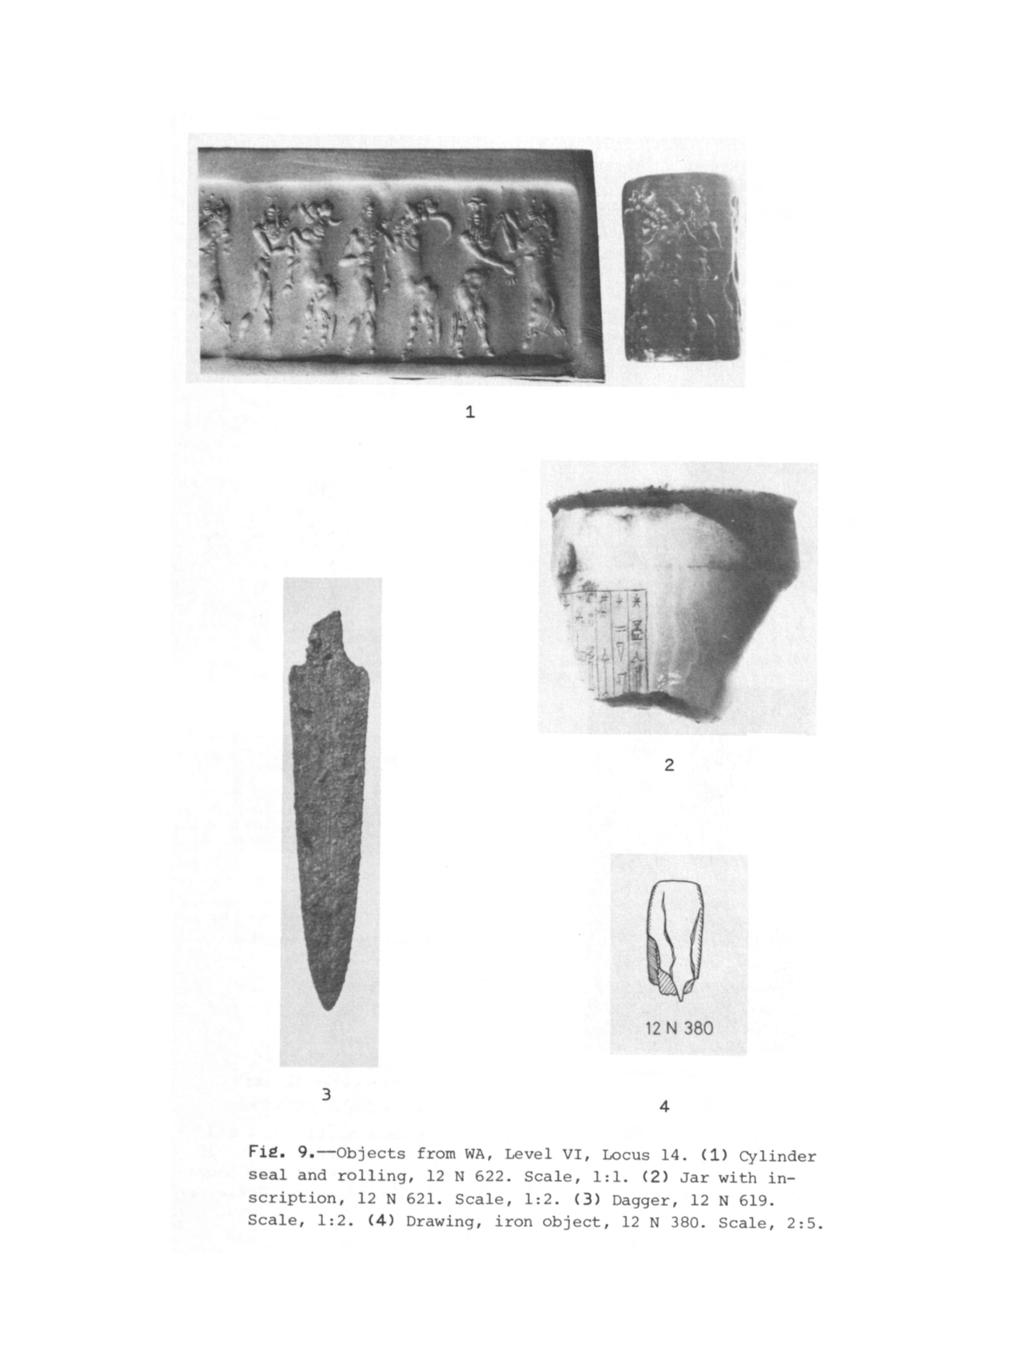 I 0 12 N 380 3 4 Fig. 9.-Objects from WA, Level VI, Locus 14. (1) Cylinder seal and rolling, 12 N 622. Scale, 1:1.